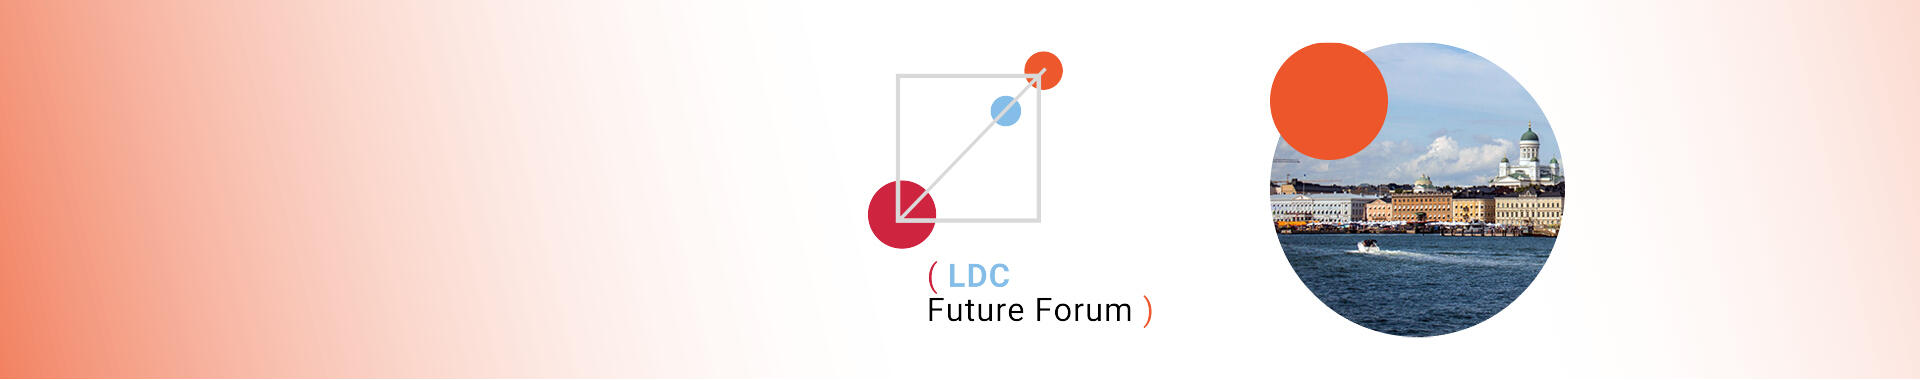 Achieving Sustainable Development in the Least Developed Countries – LDC Future Forum